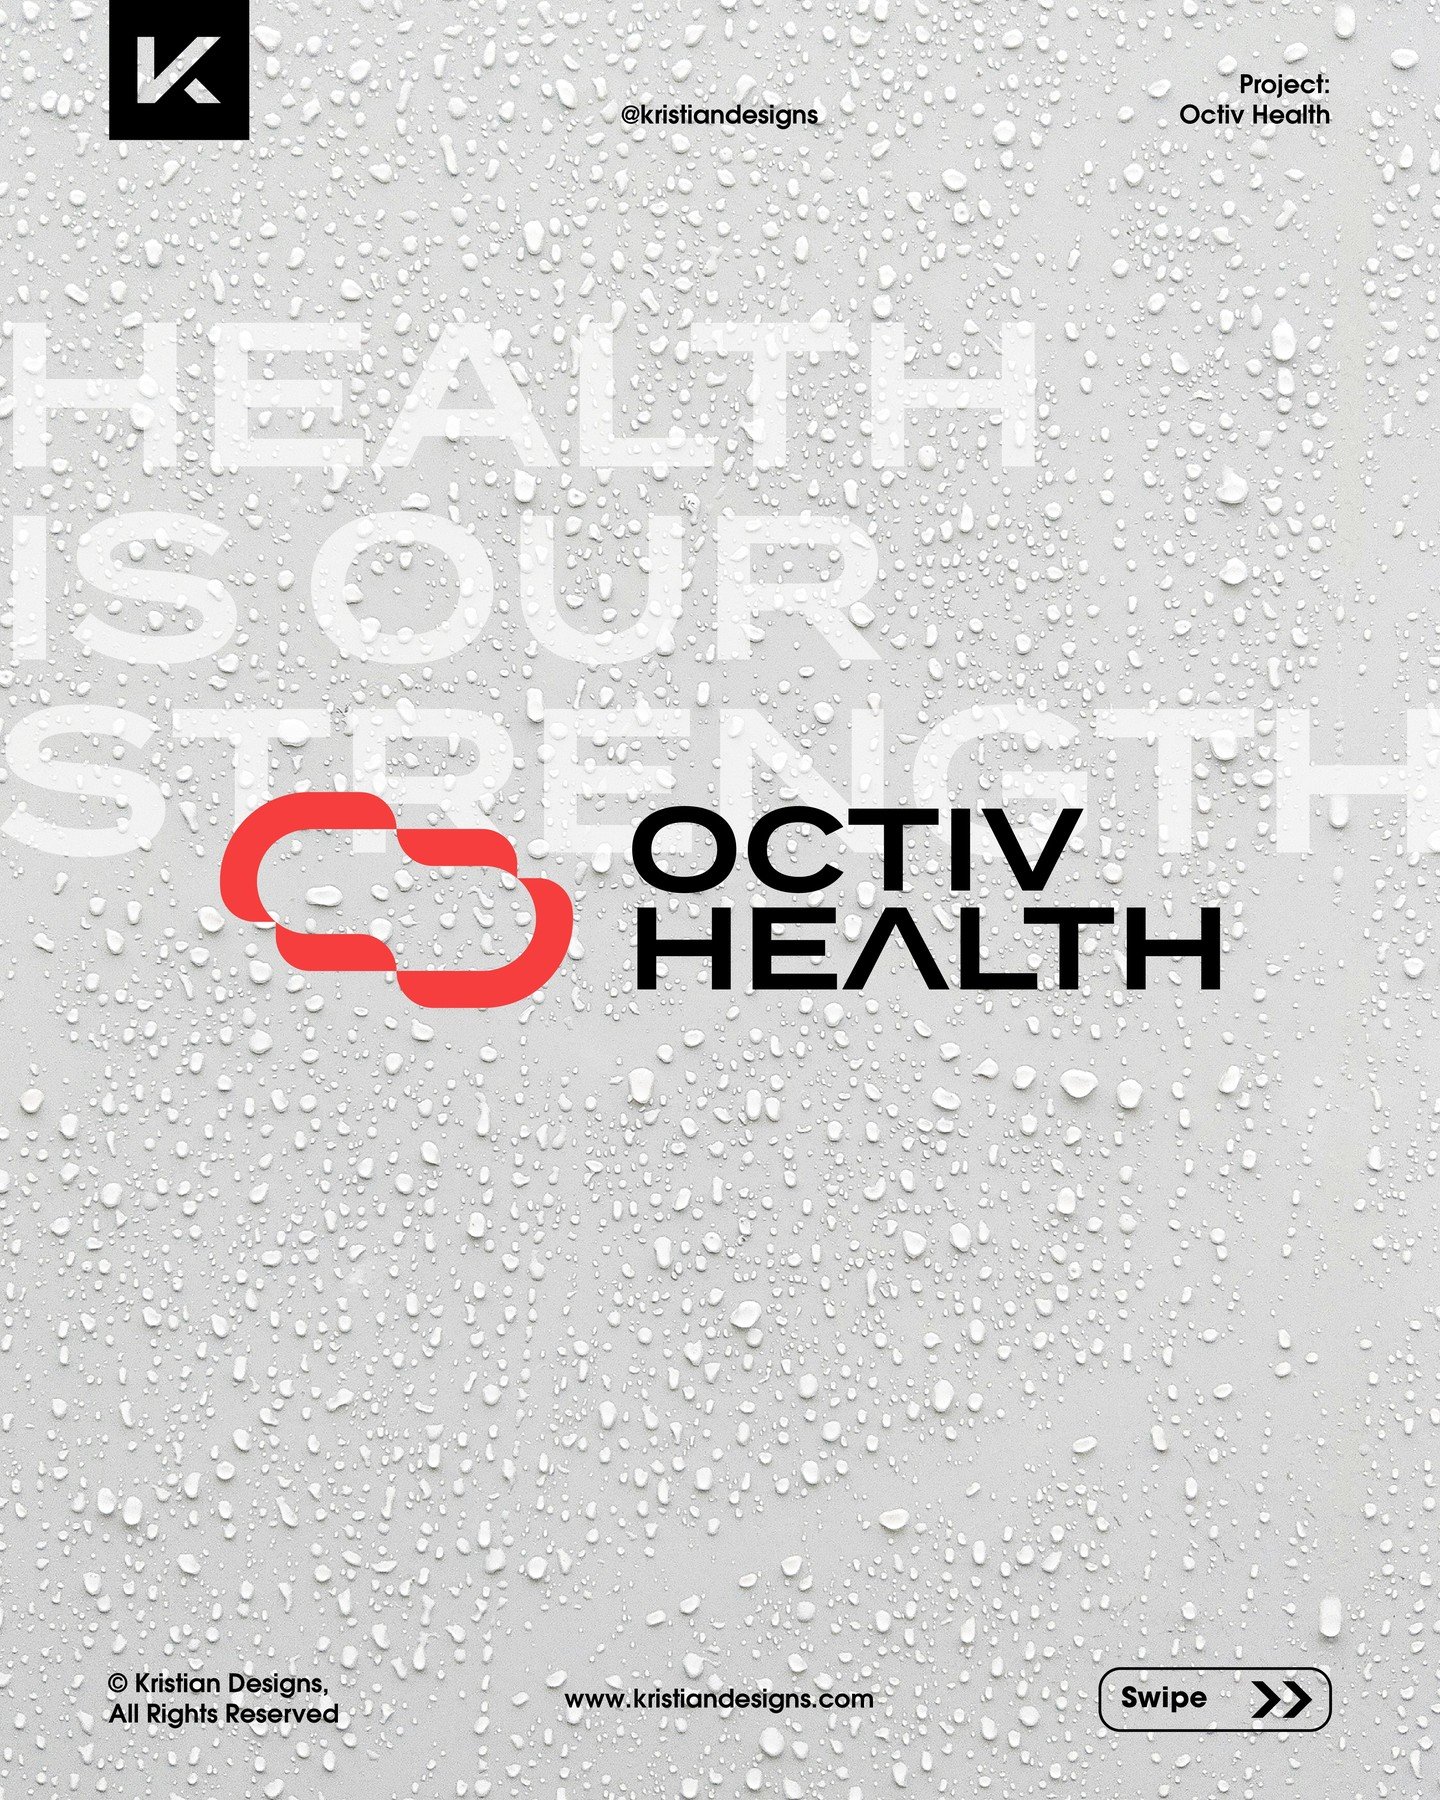 Octiv Health logo design. ✅

One of the best parts of working as a logo designer is being able to use a combination of experience and creativity to get the results you want.
This logomark was just what the client wanted and I love the fact that somet